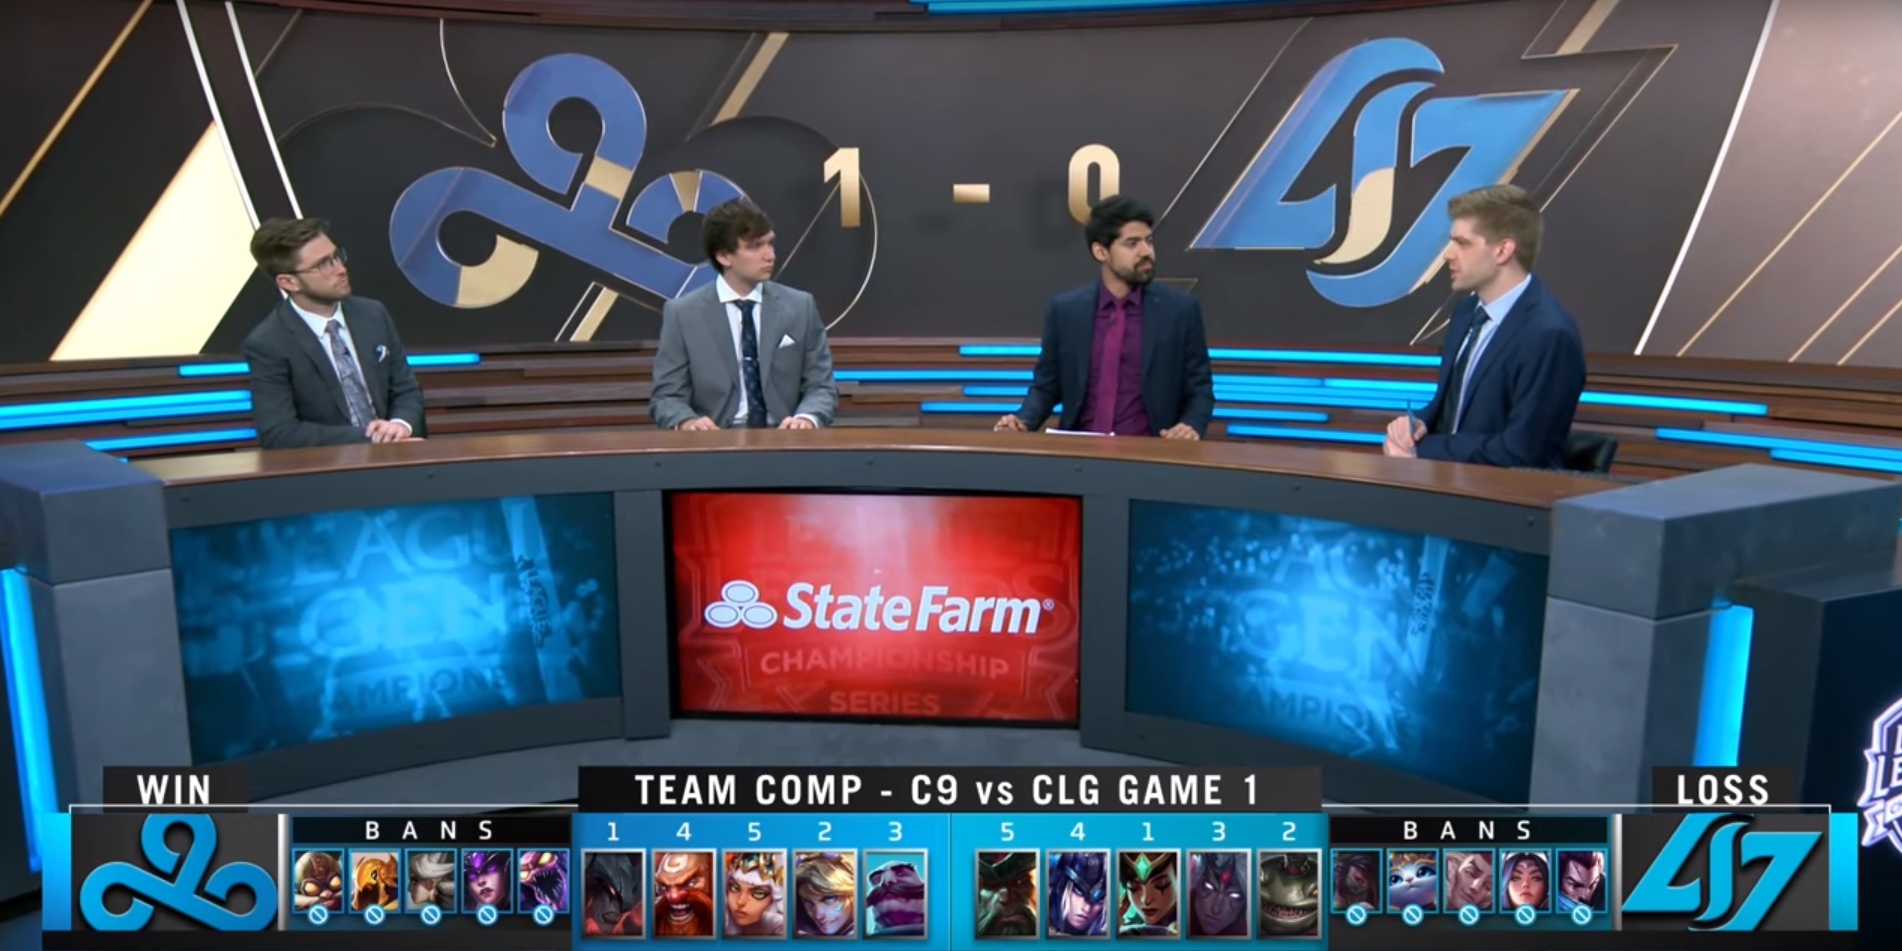 LCS Fines Cloud9 A Total Of $175,000 For Violation Of Rules In Issuing Seven Players Stock Grants